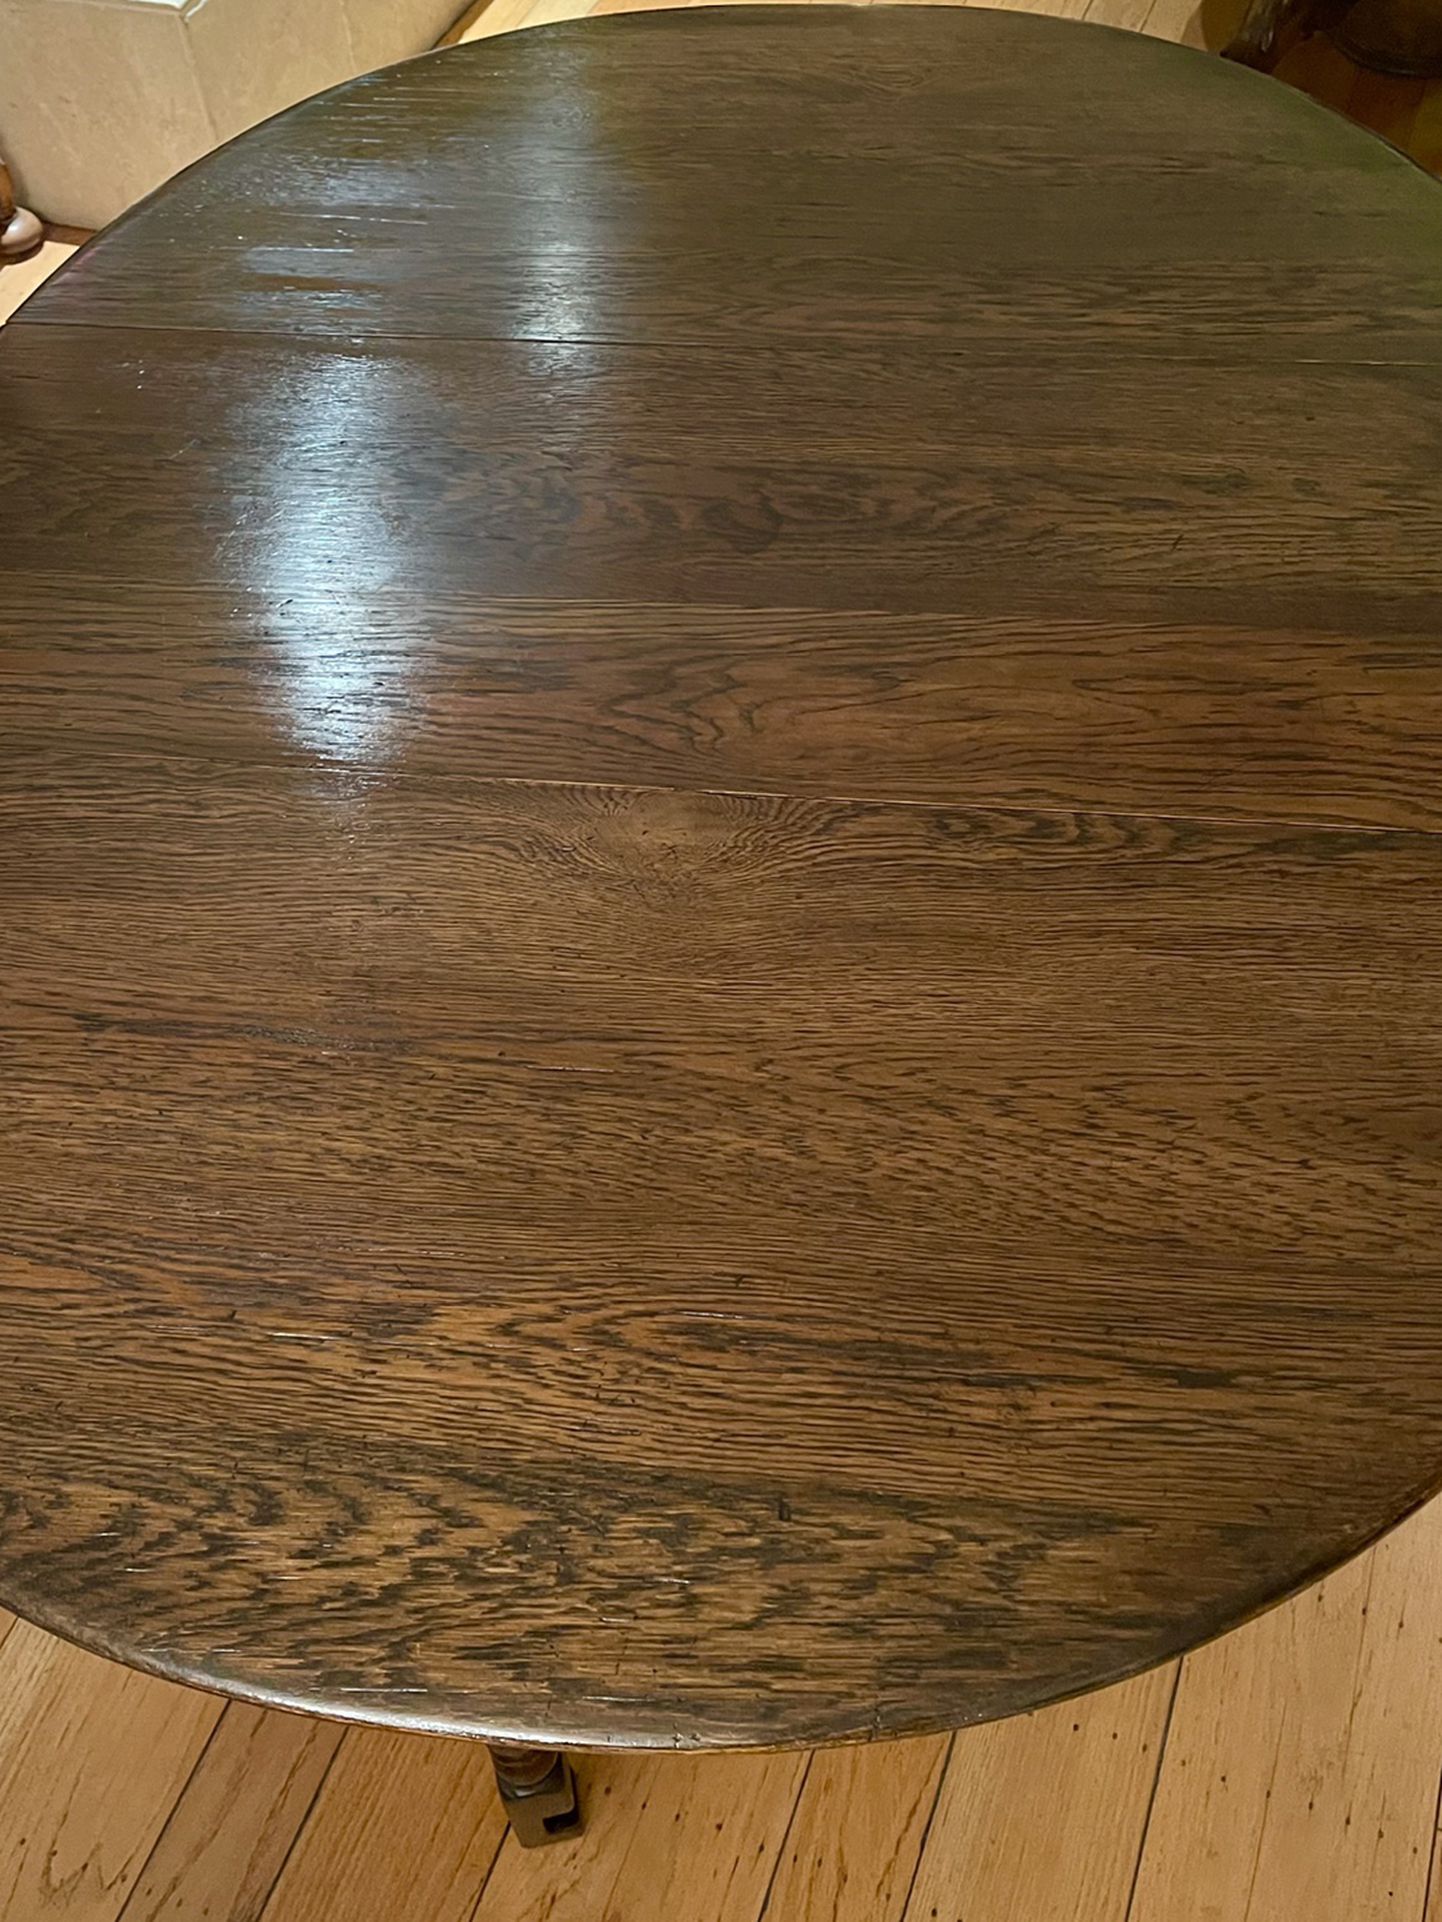 Antique maple dropleaf table